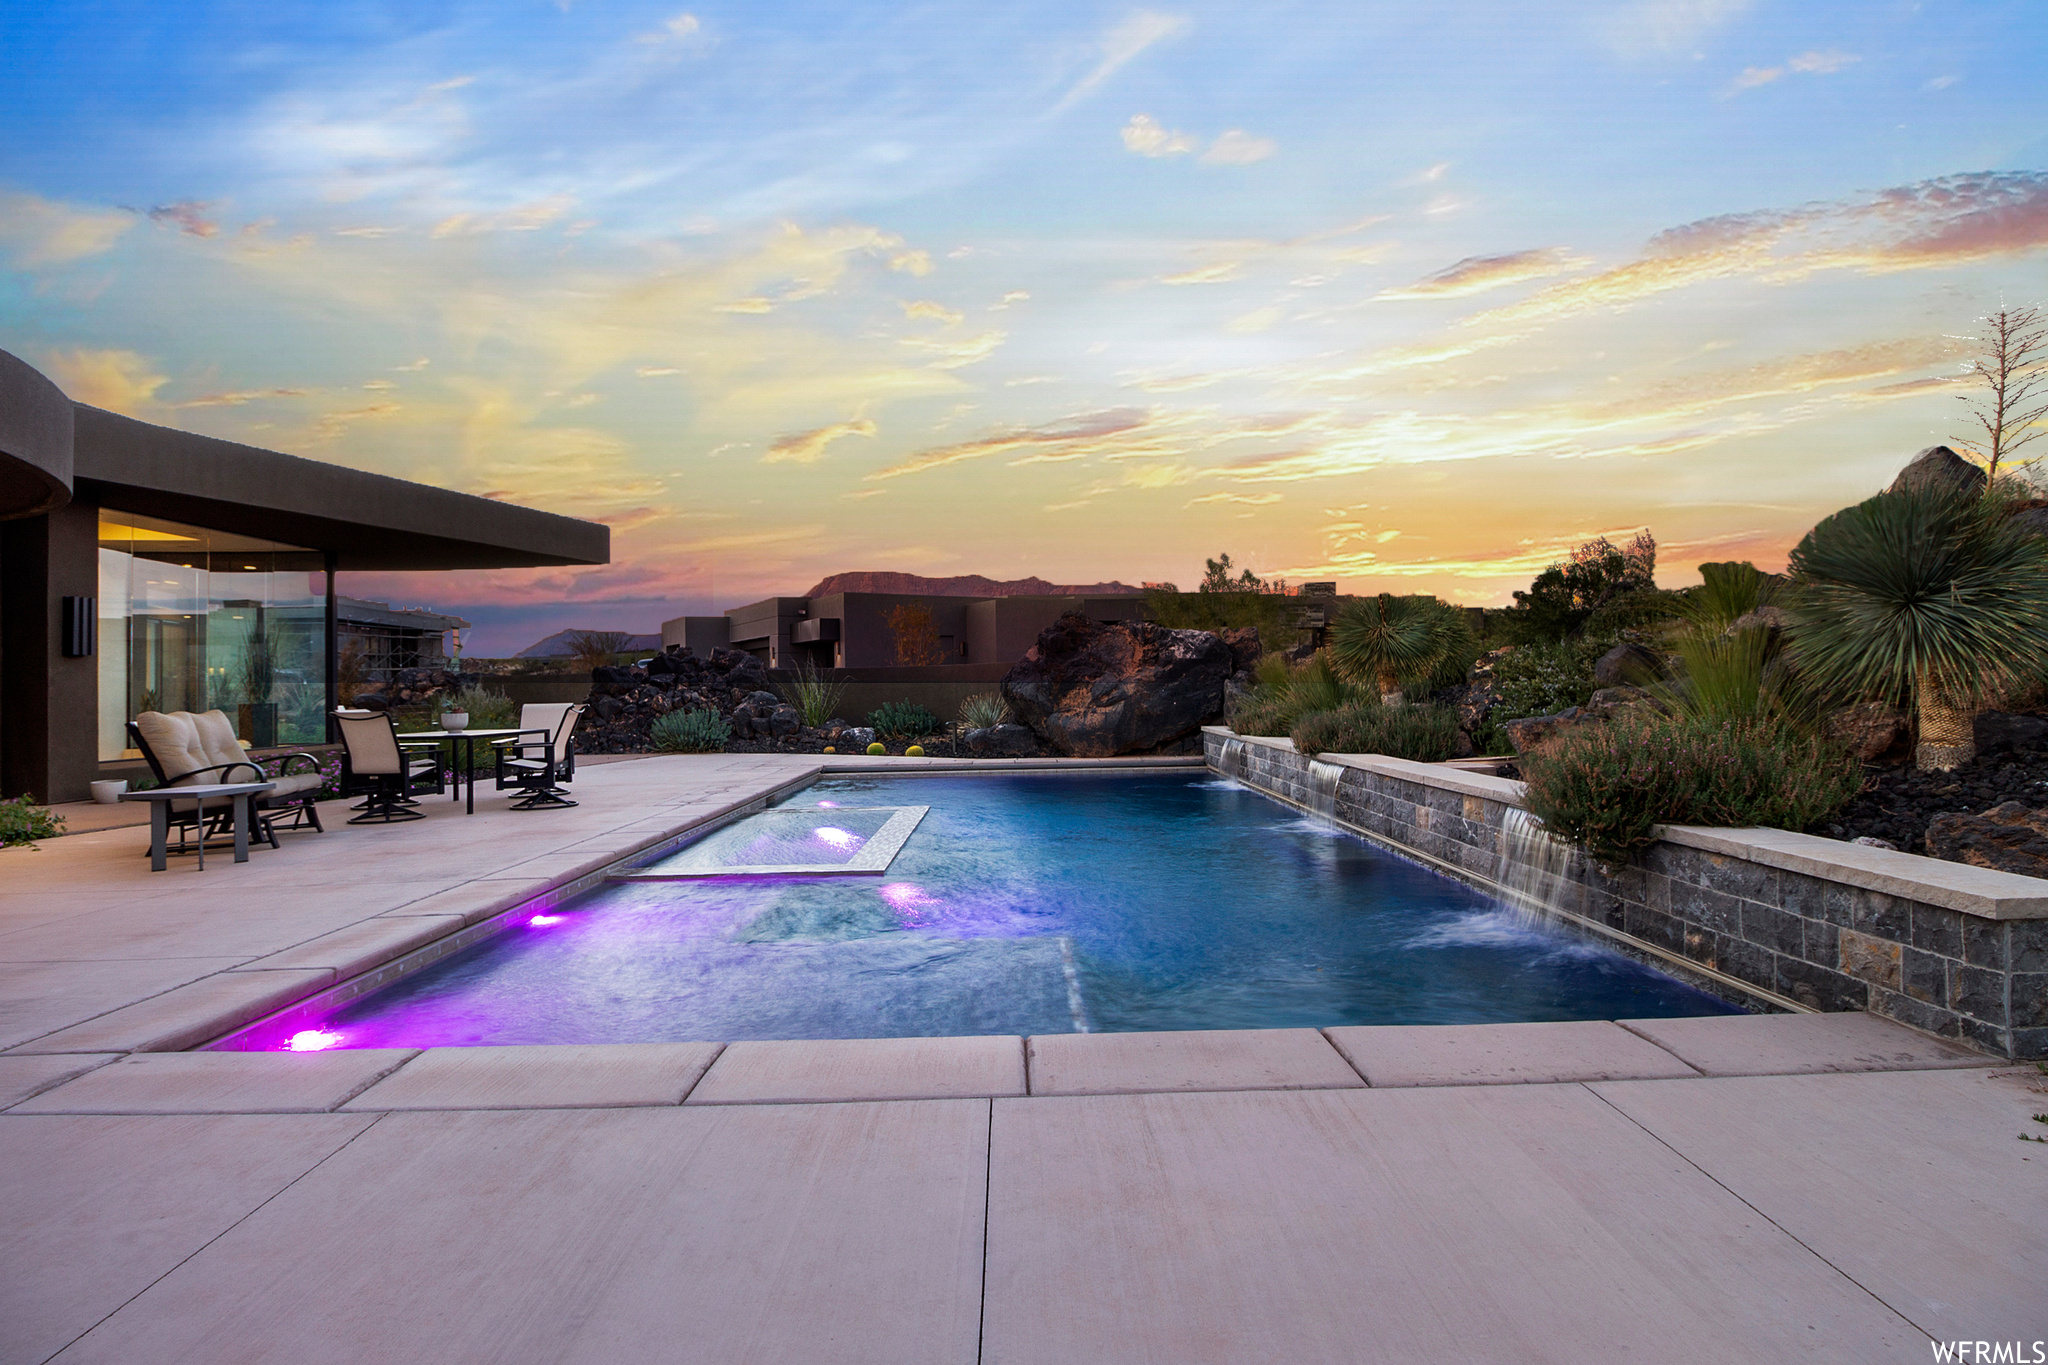 Pool at dusk featuring pool water feature and a patio